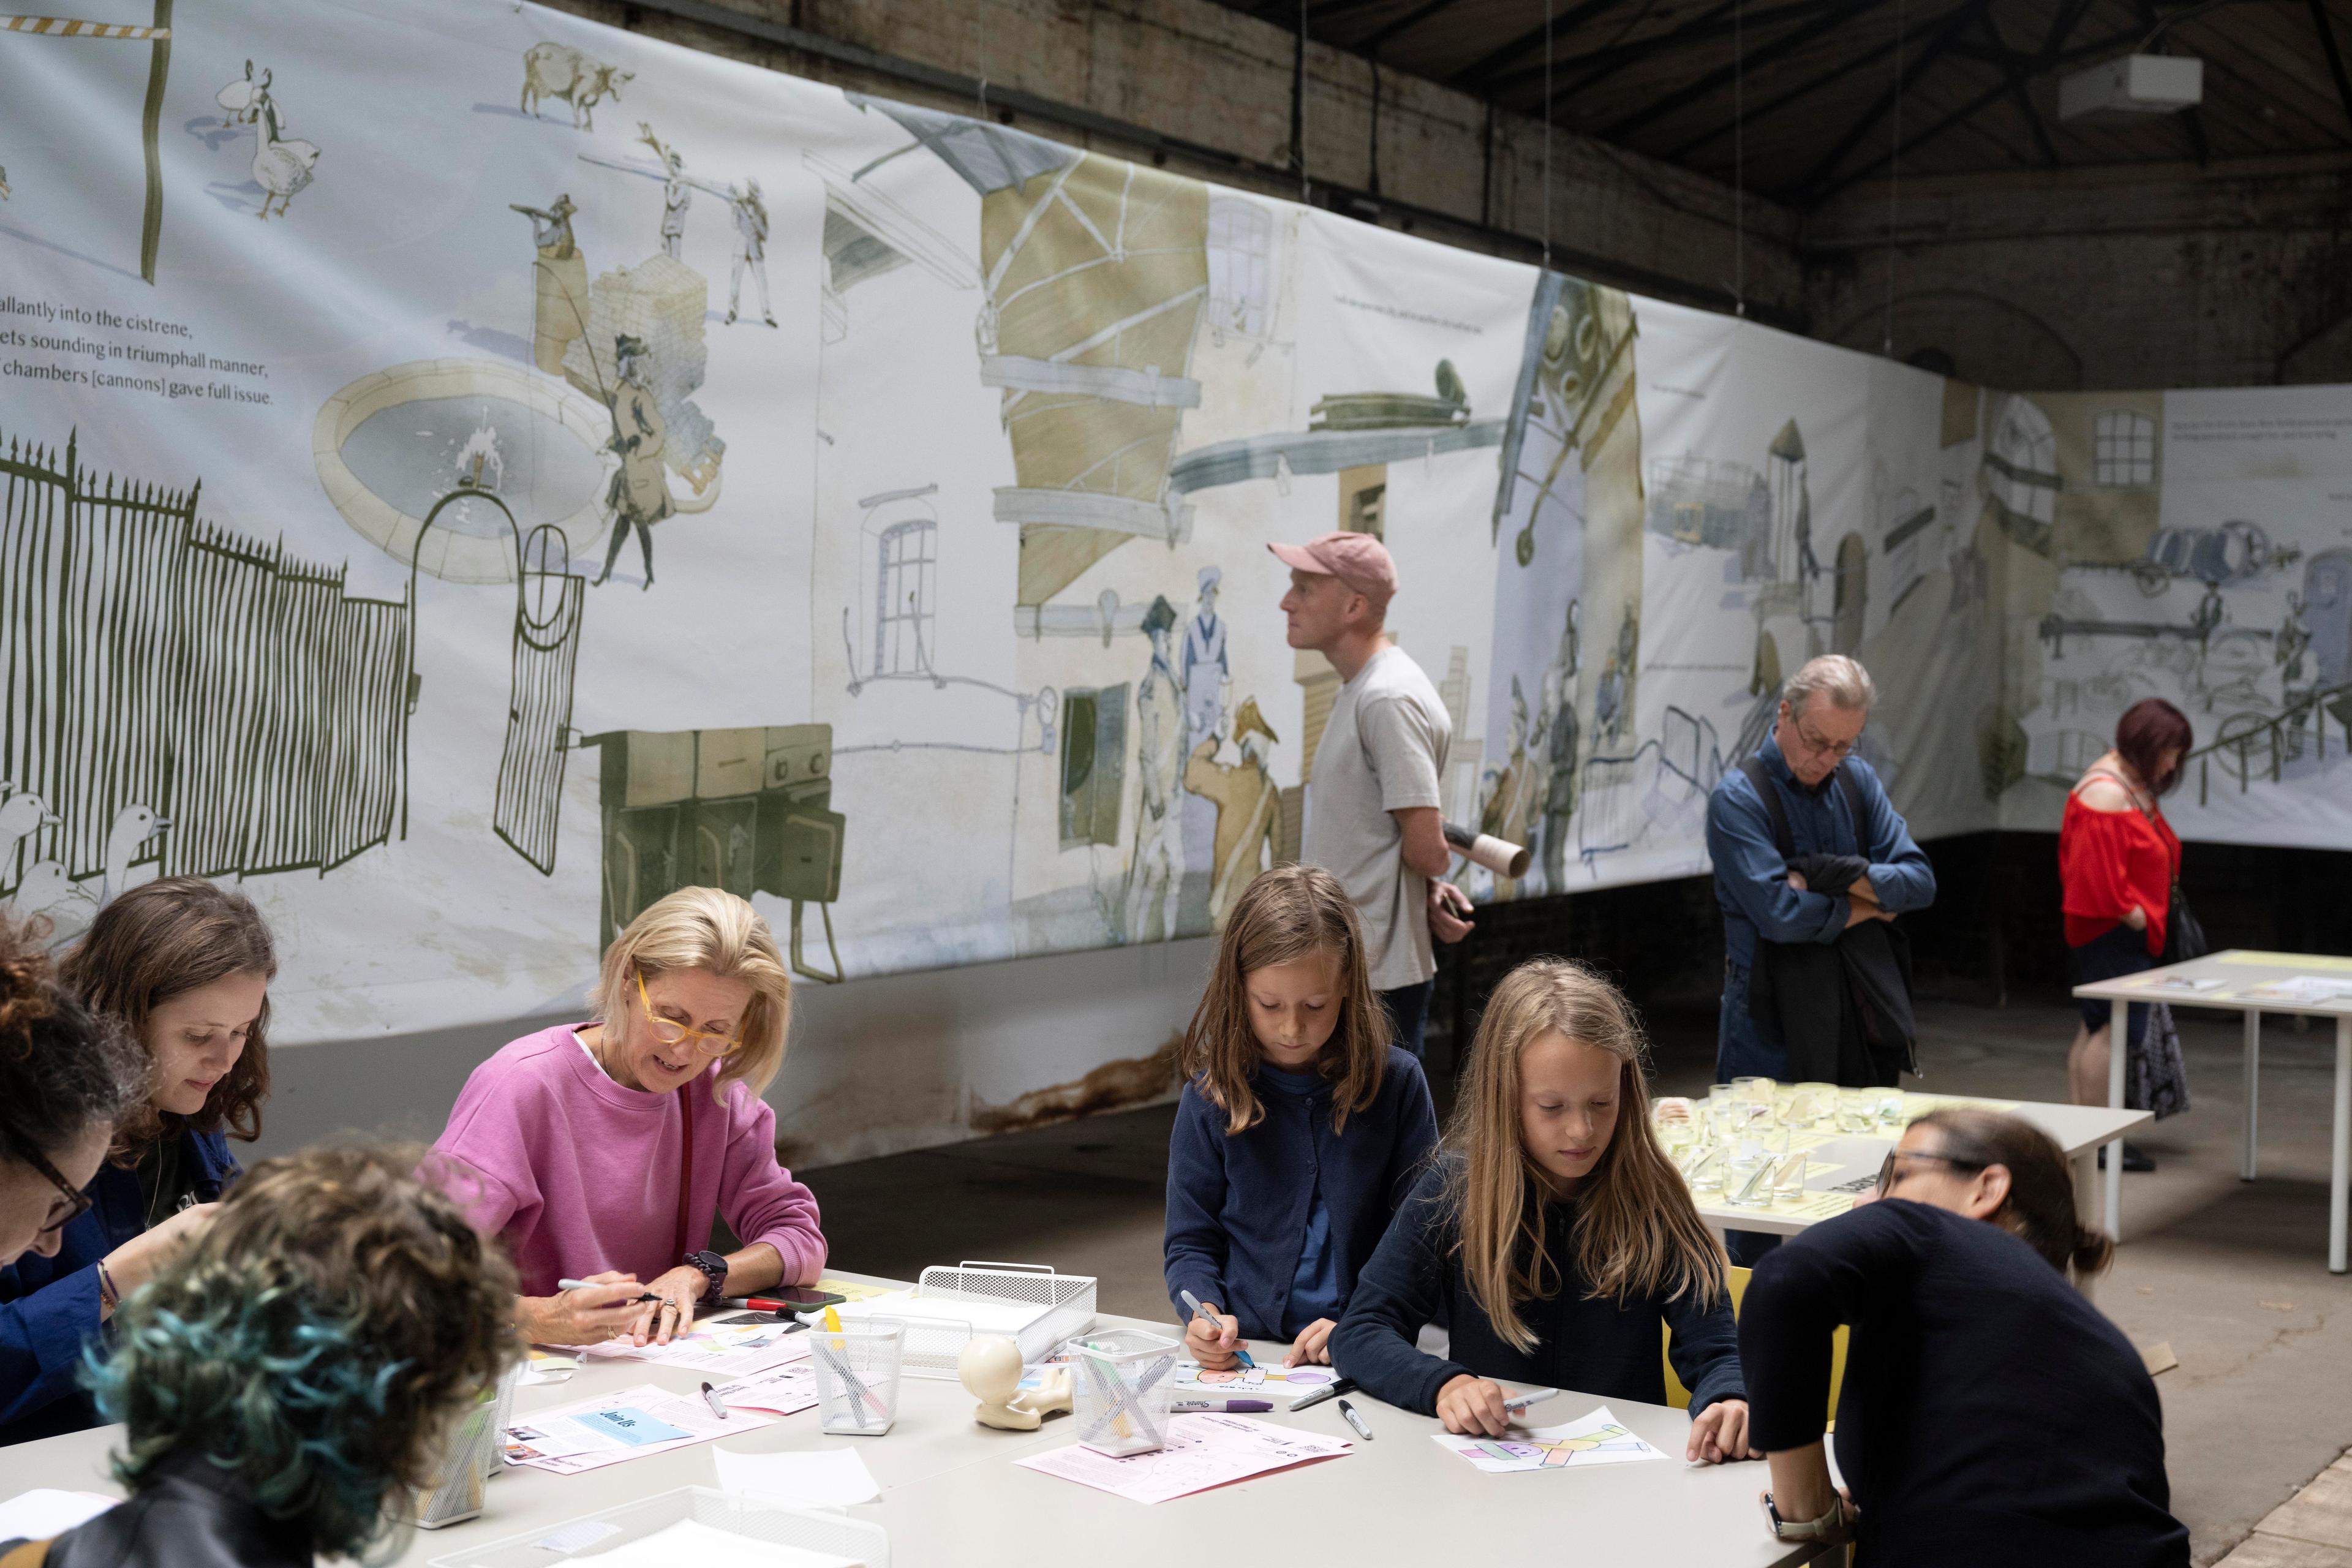 People completing an arts activity at a table.